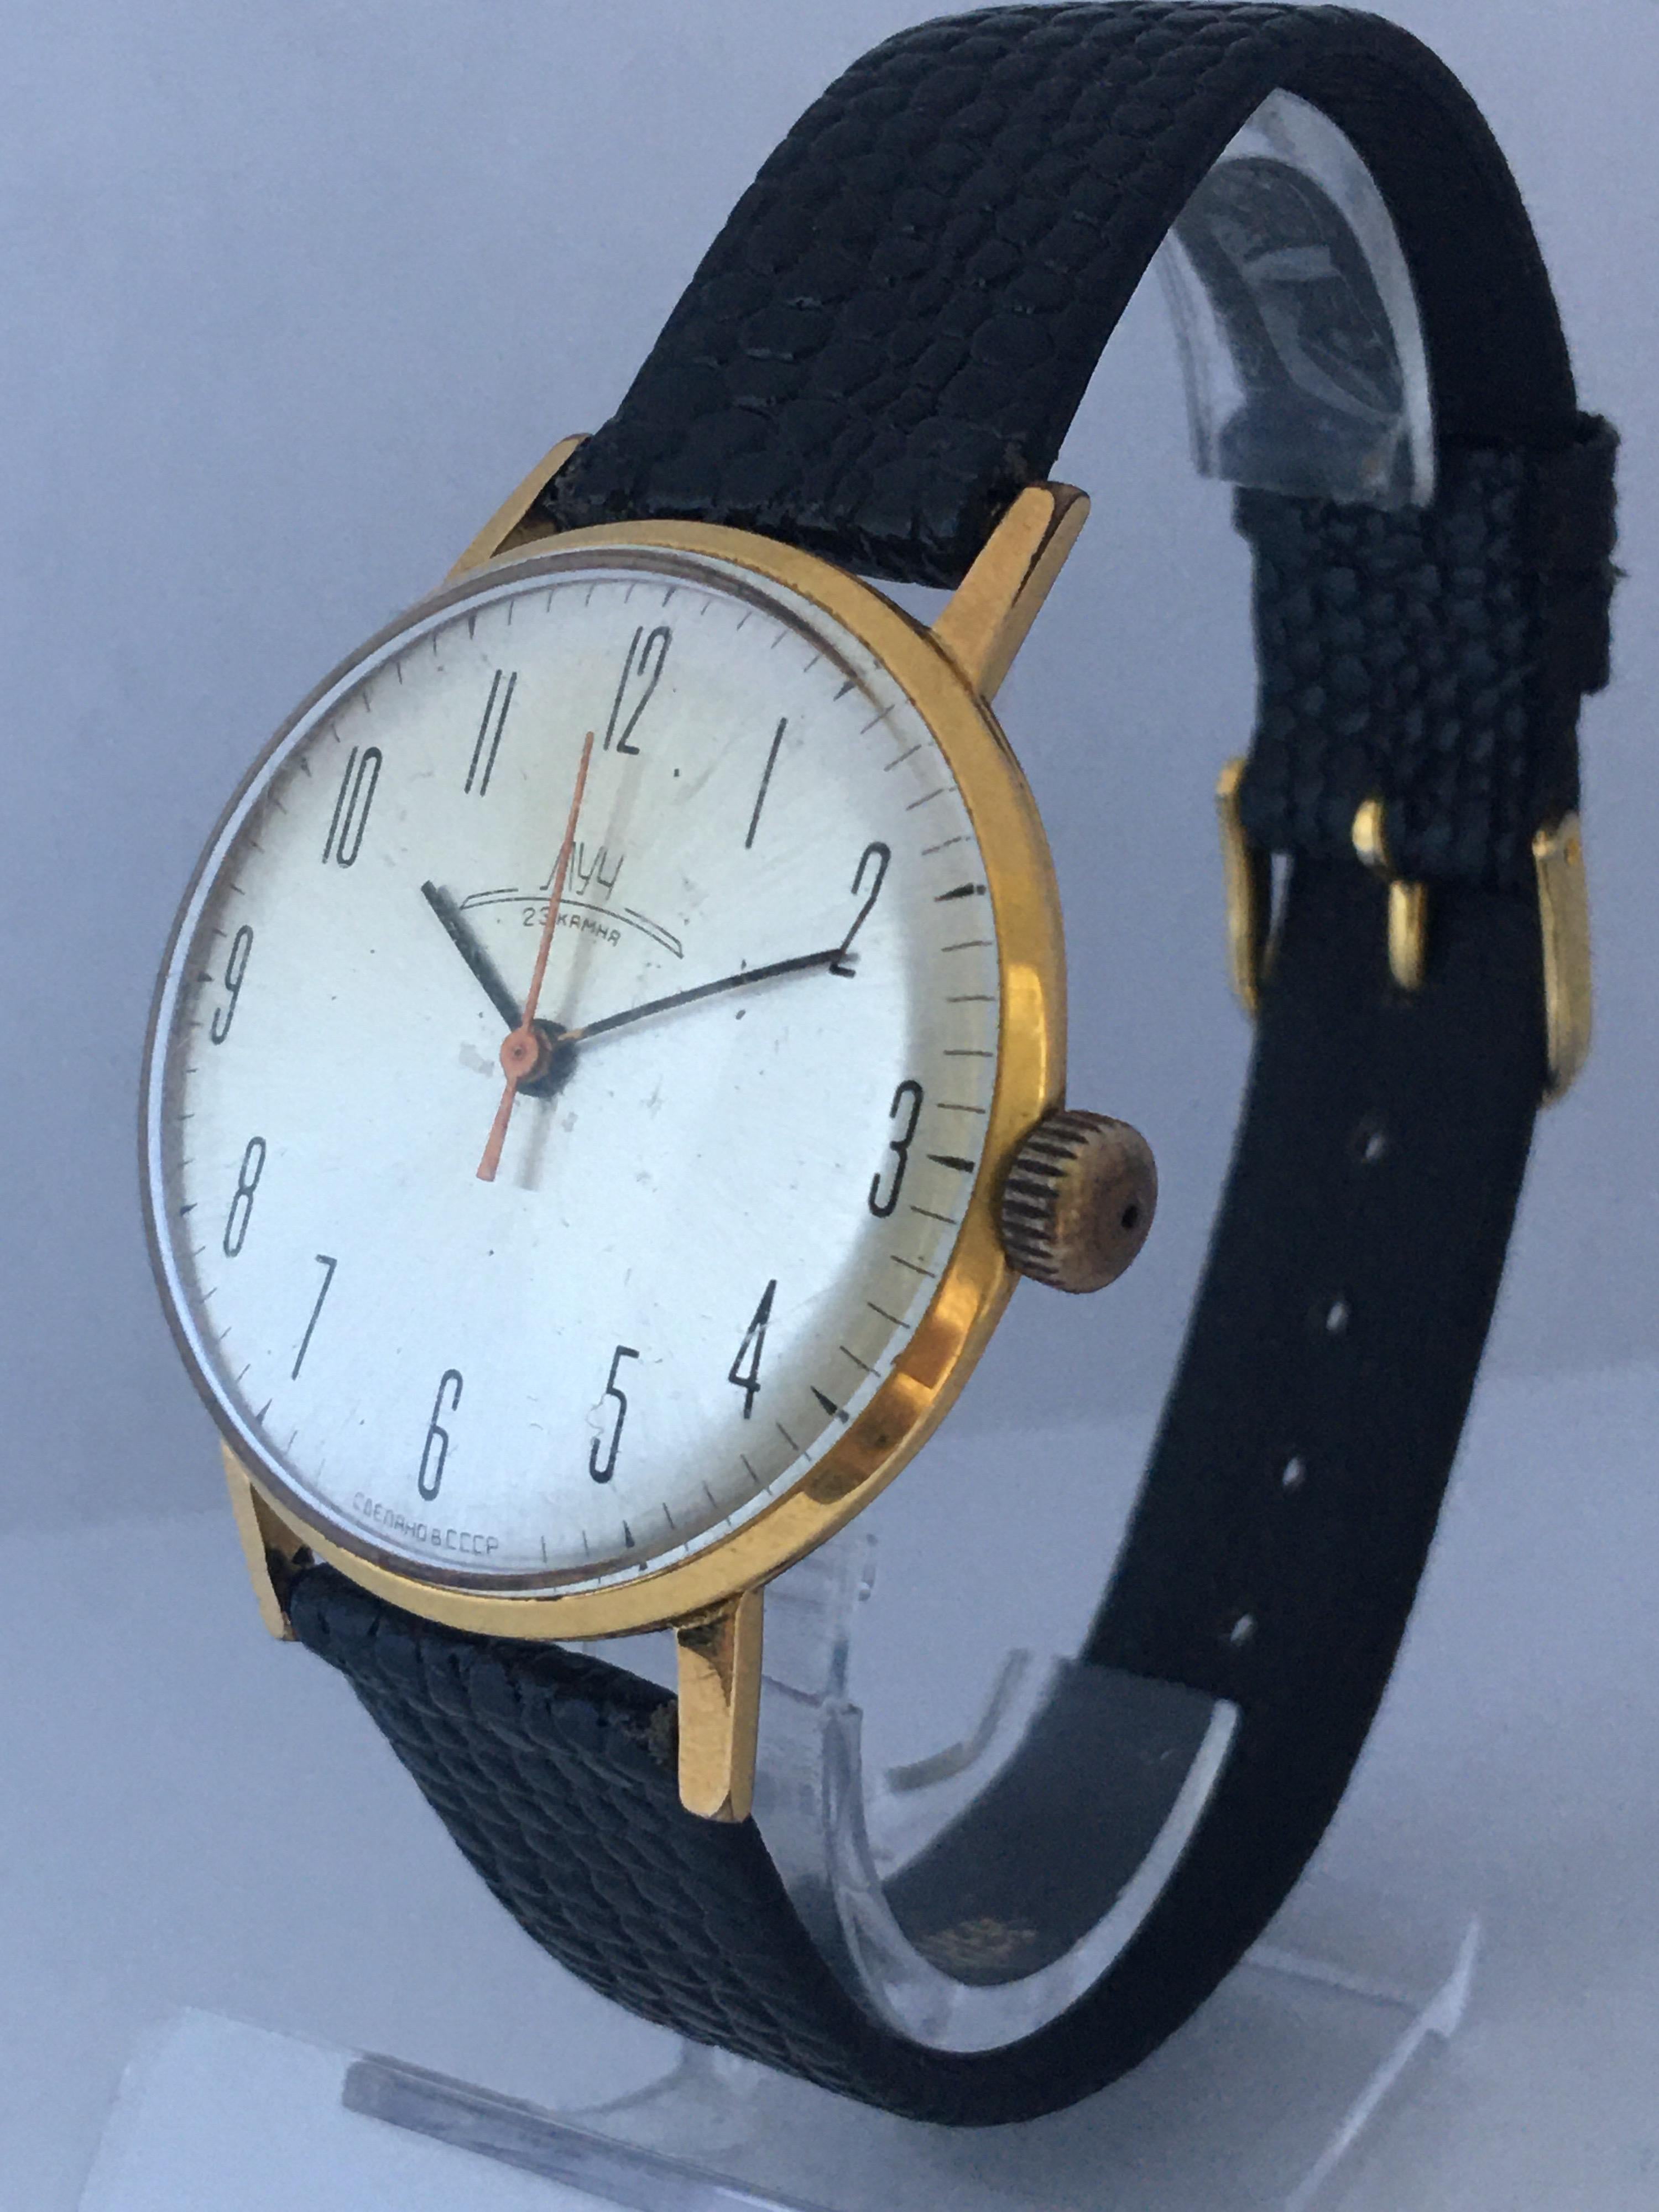 This beautiful pre-owned vintage hand winding watch is I good working condition and it is running well. Visible signs of used and has aged with the silvered has some dirt. There are some small and light scratches on the glass and on the watch case